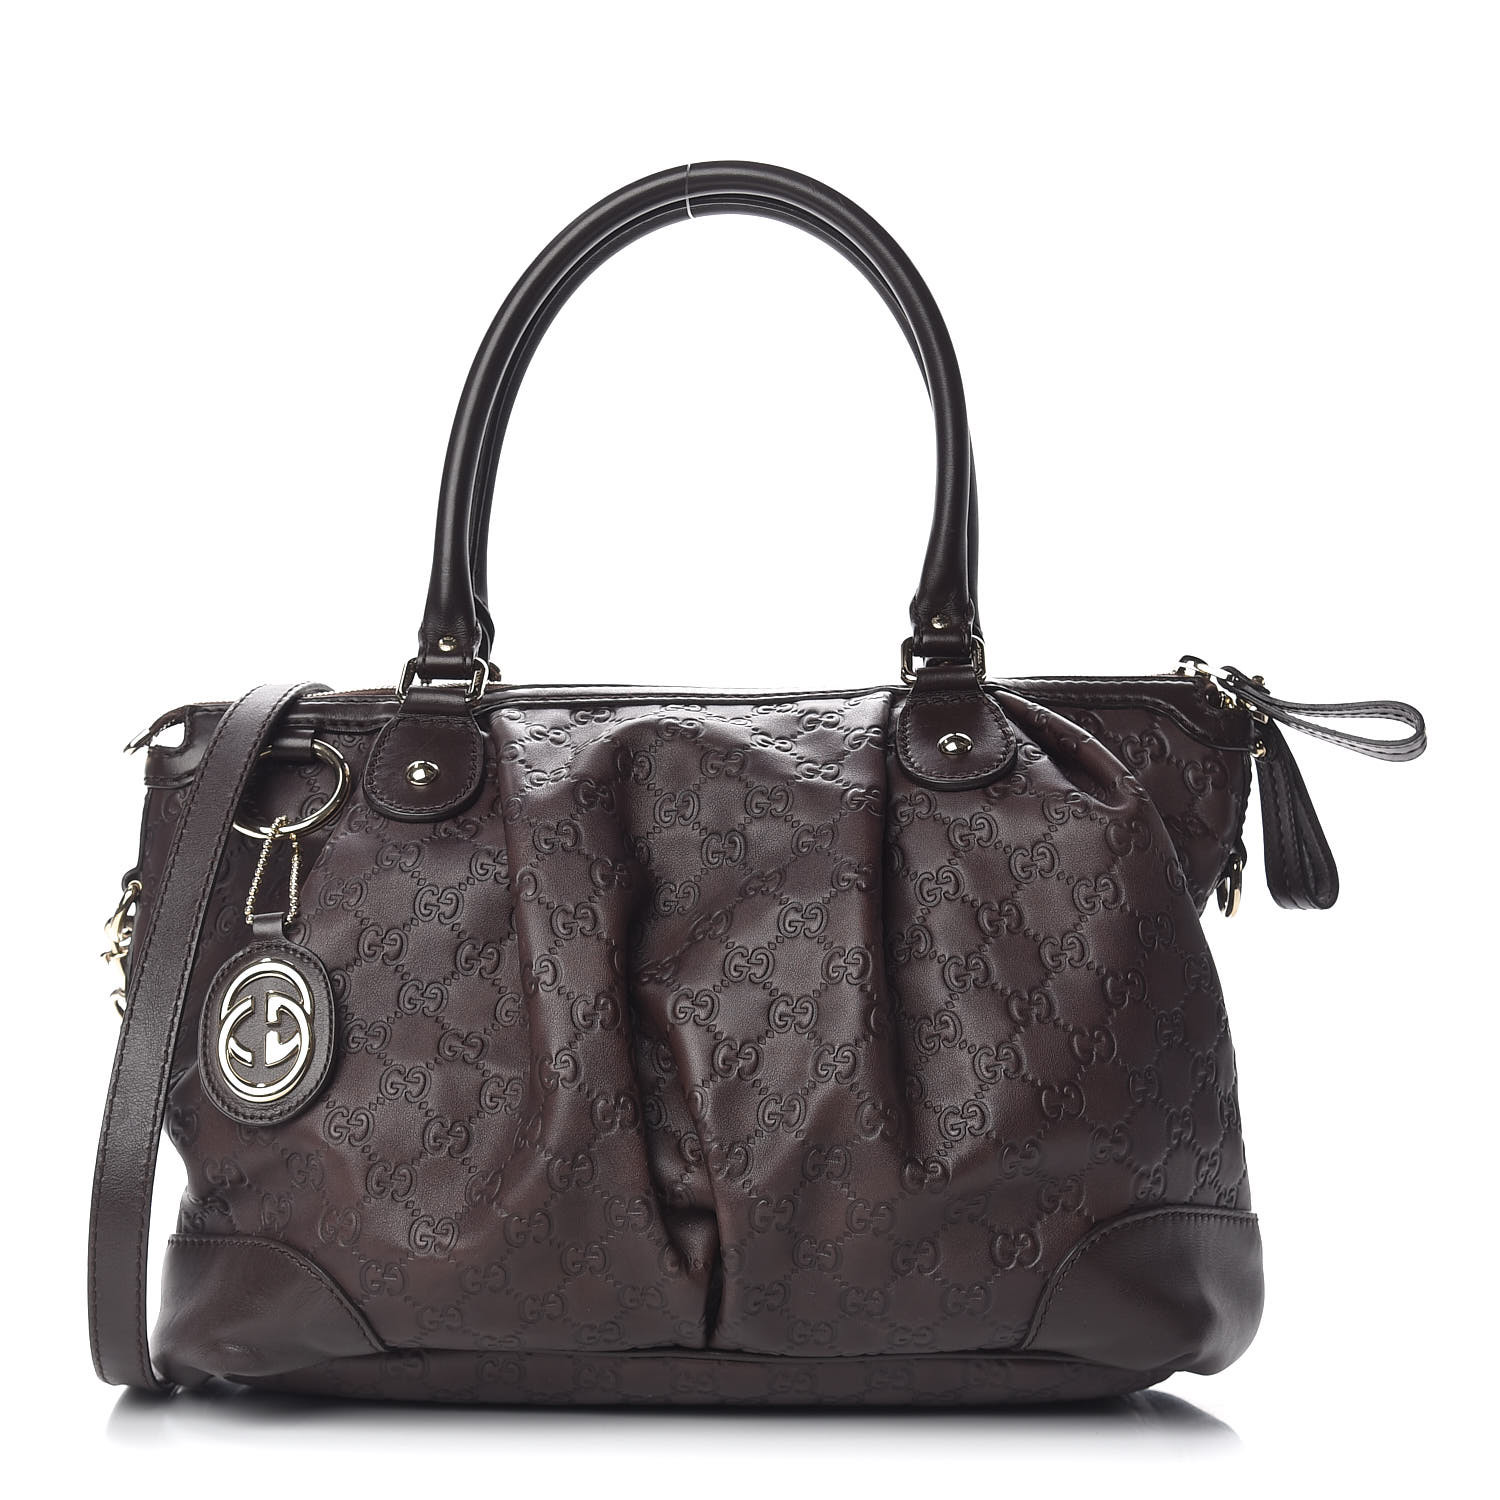 GUCCI Guccissima Large Sukey Top Handle Bag Chocolate 480388